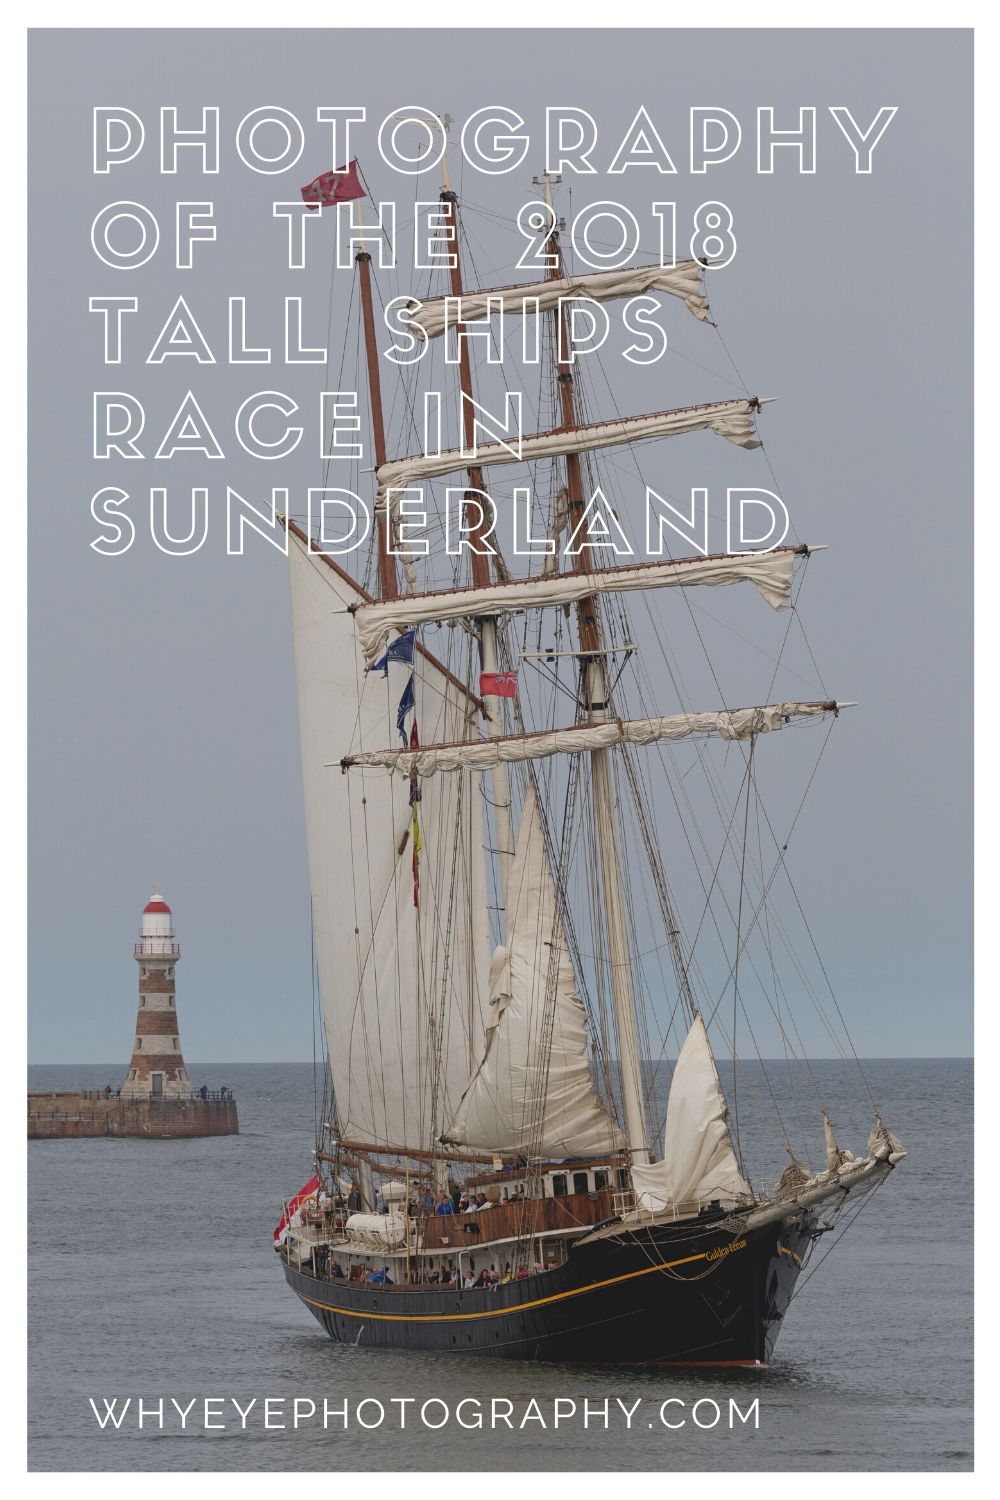 Pinterest pin for the whyeyephotography.com blog post about photography of the 2018 Tall Ships Race in Sunderland.